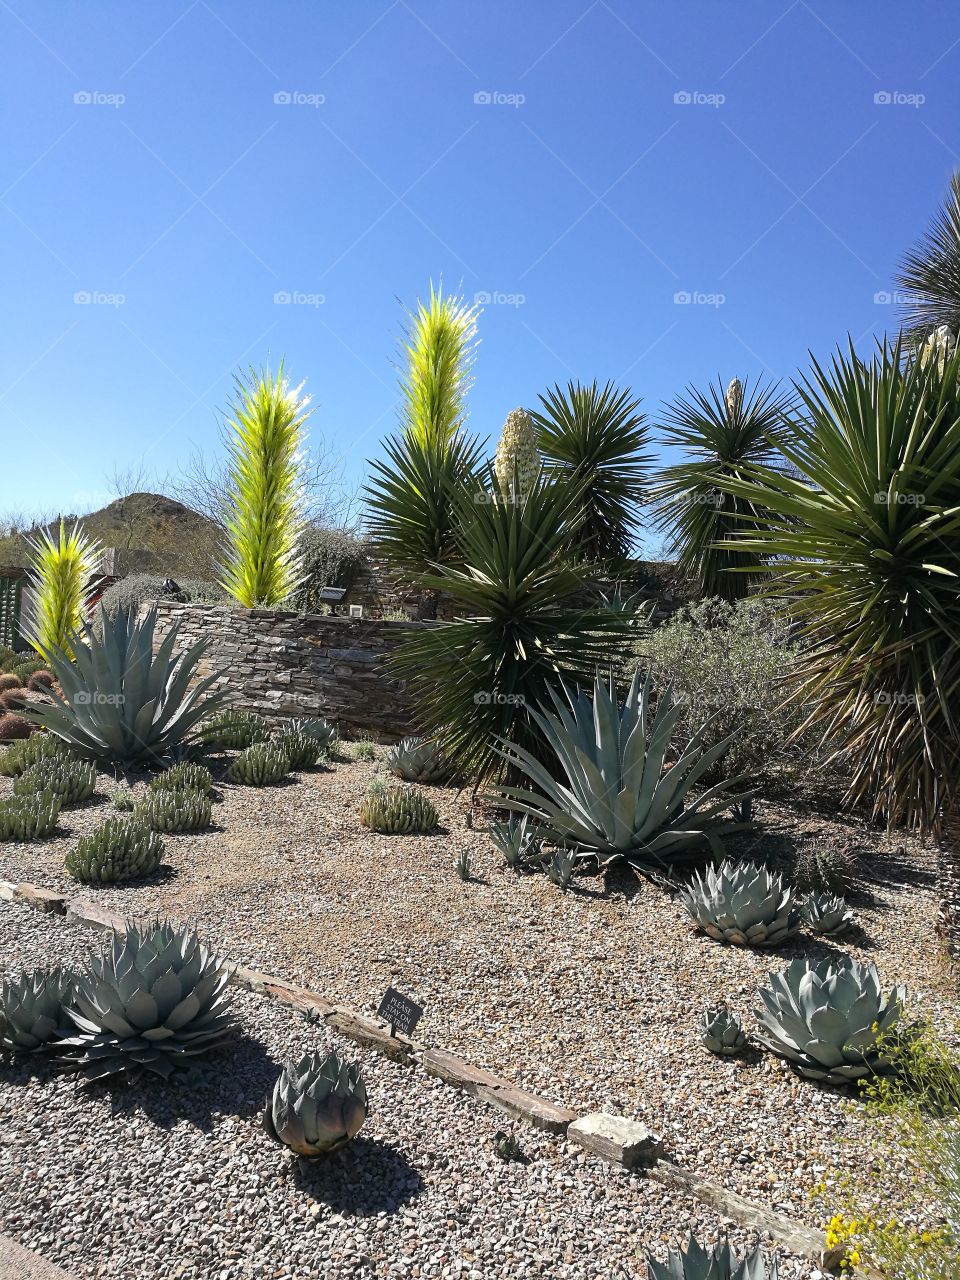 Beautiful scene of different kinds of cactus trees and ornamental glass cactus